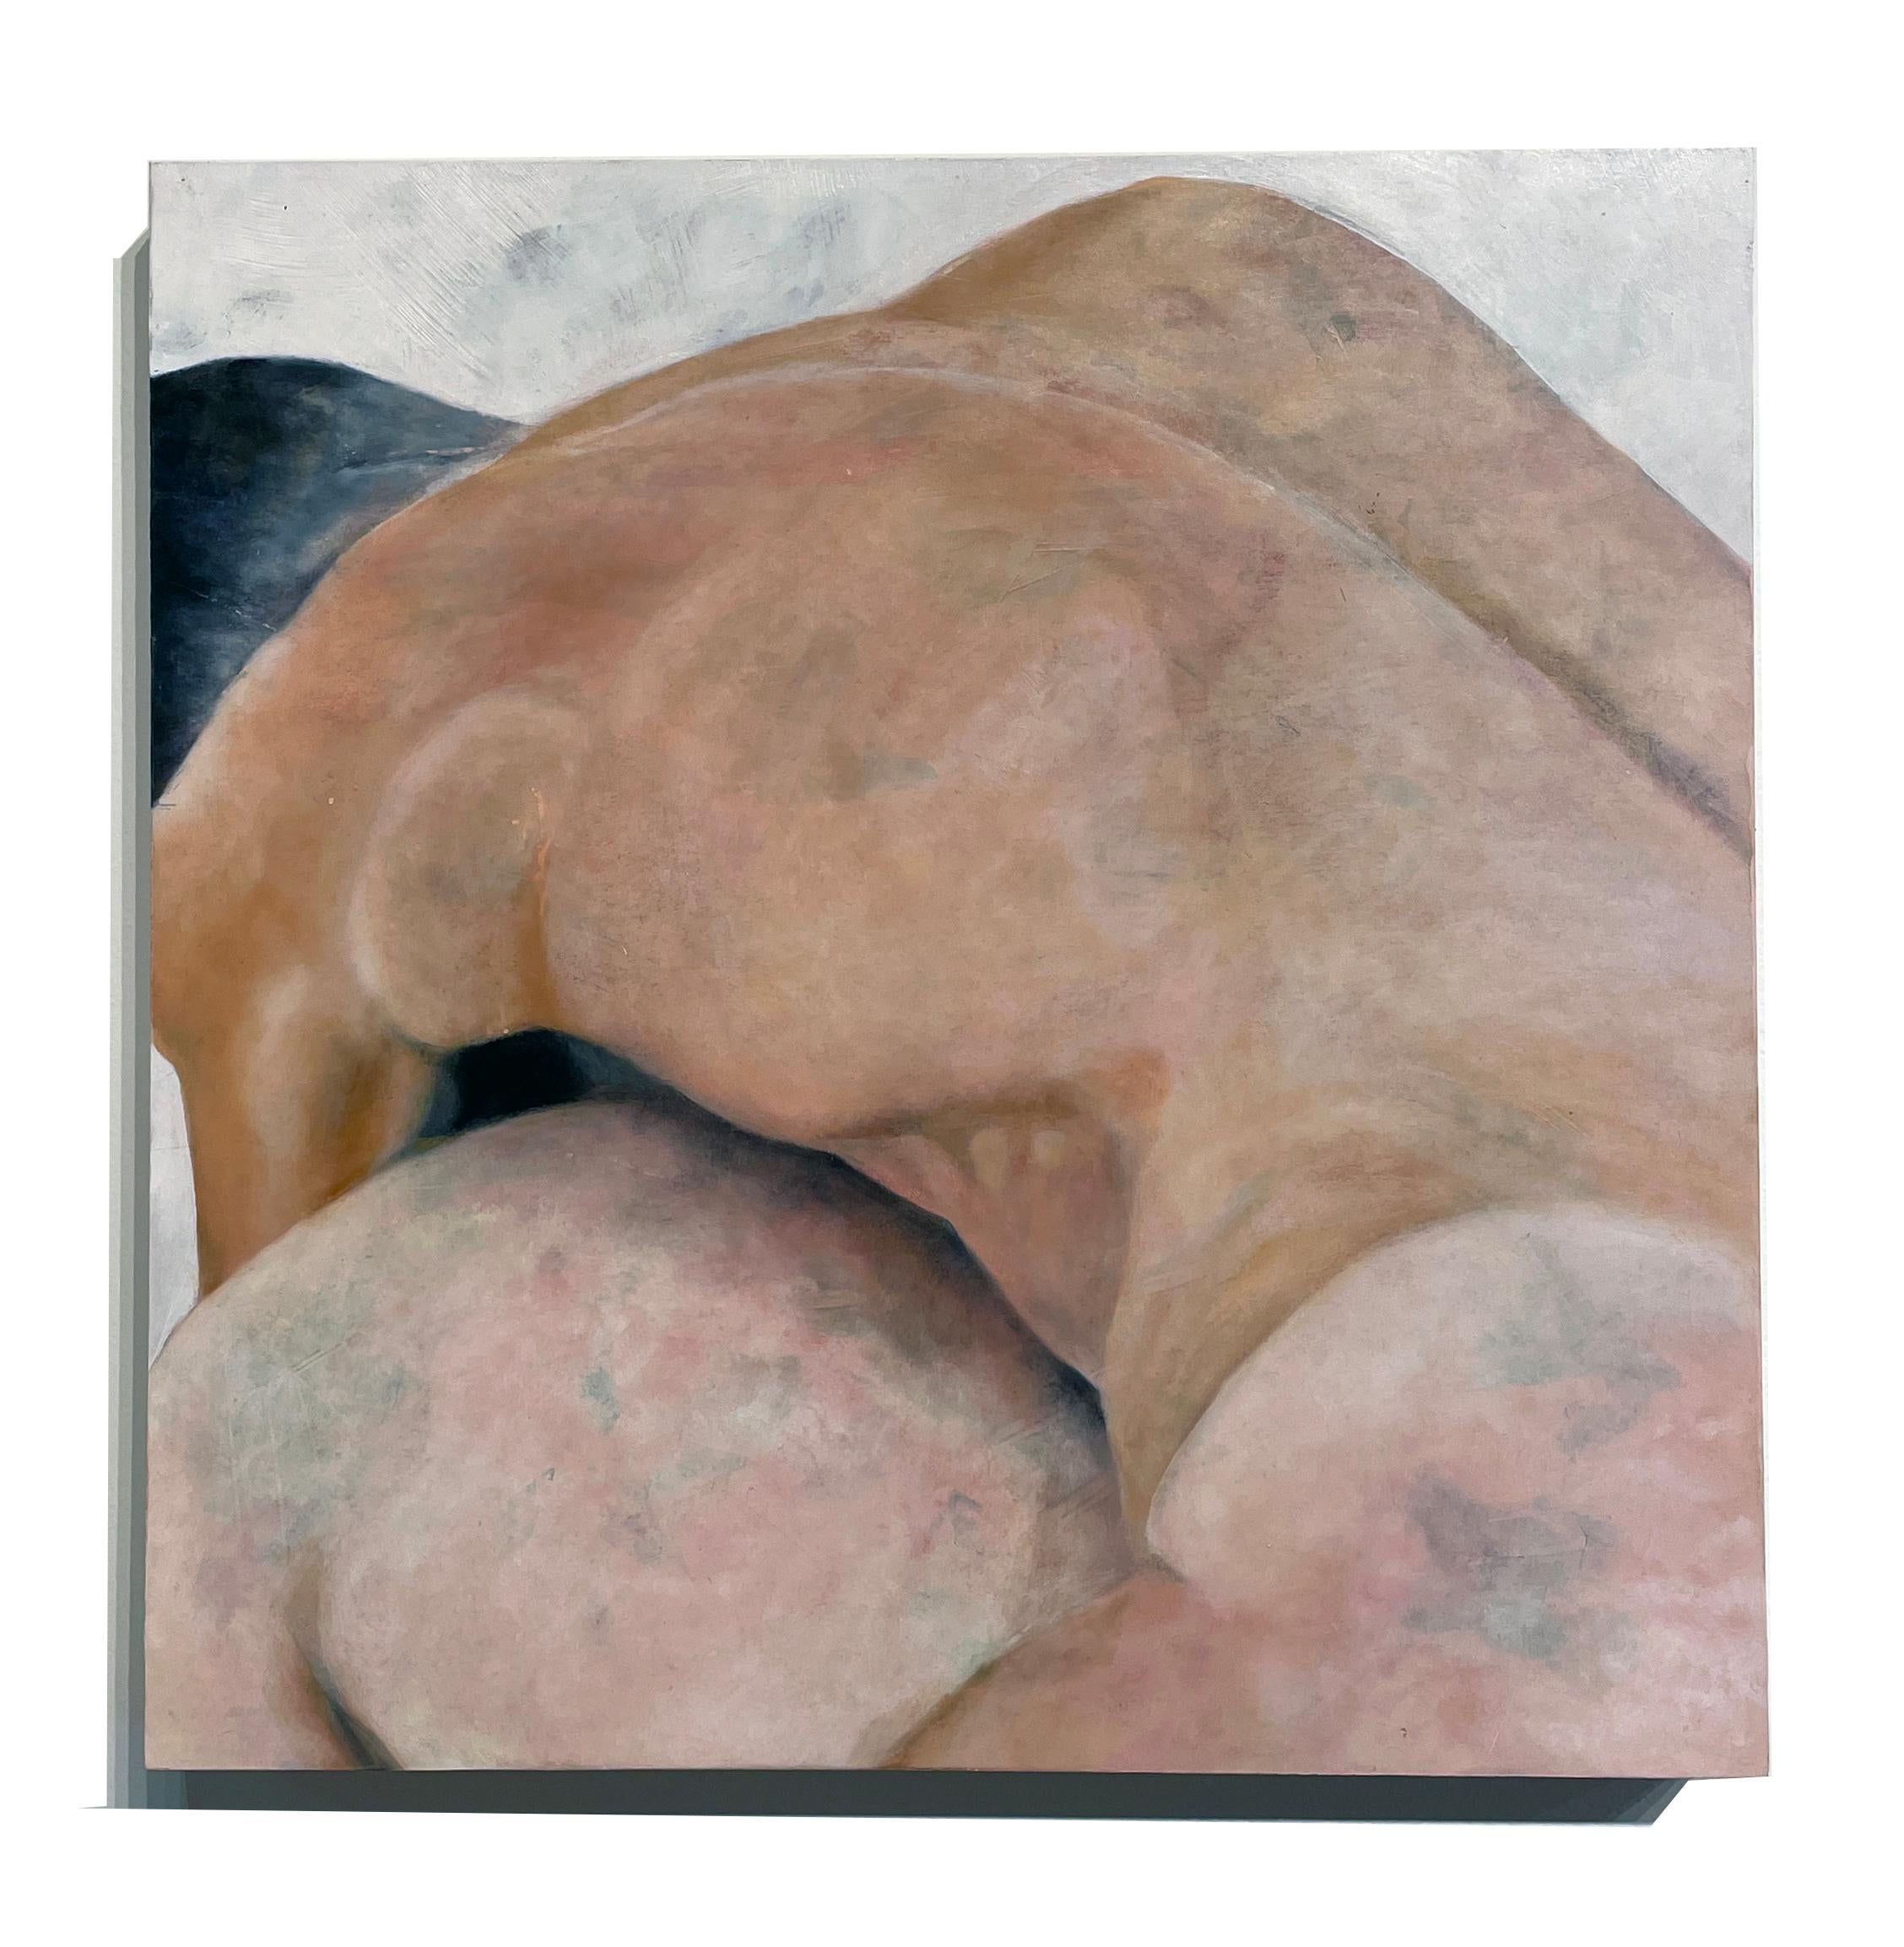 Shield Me - Nude Figures, Intimate Portrayal of a Couple, Original Oil on Panel - Painting by Rick Sindt